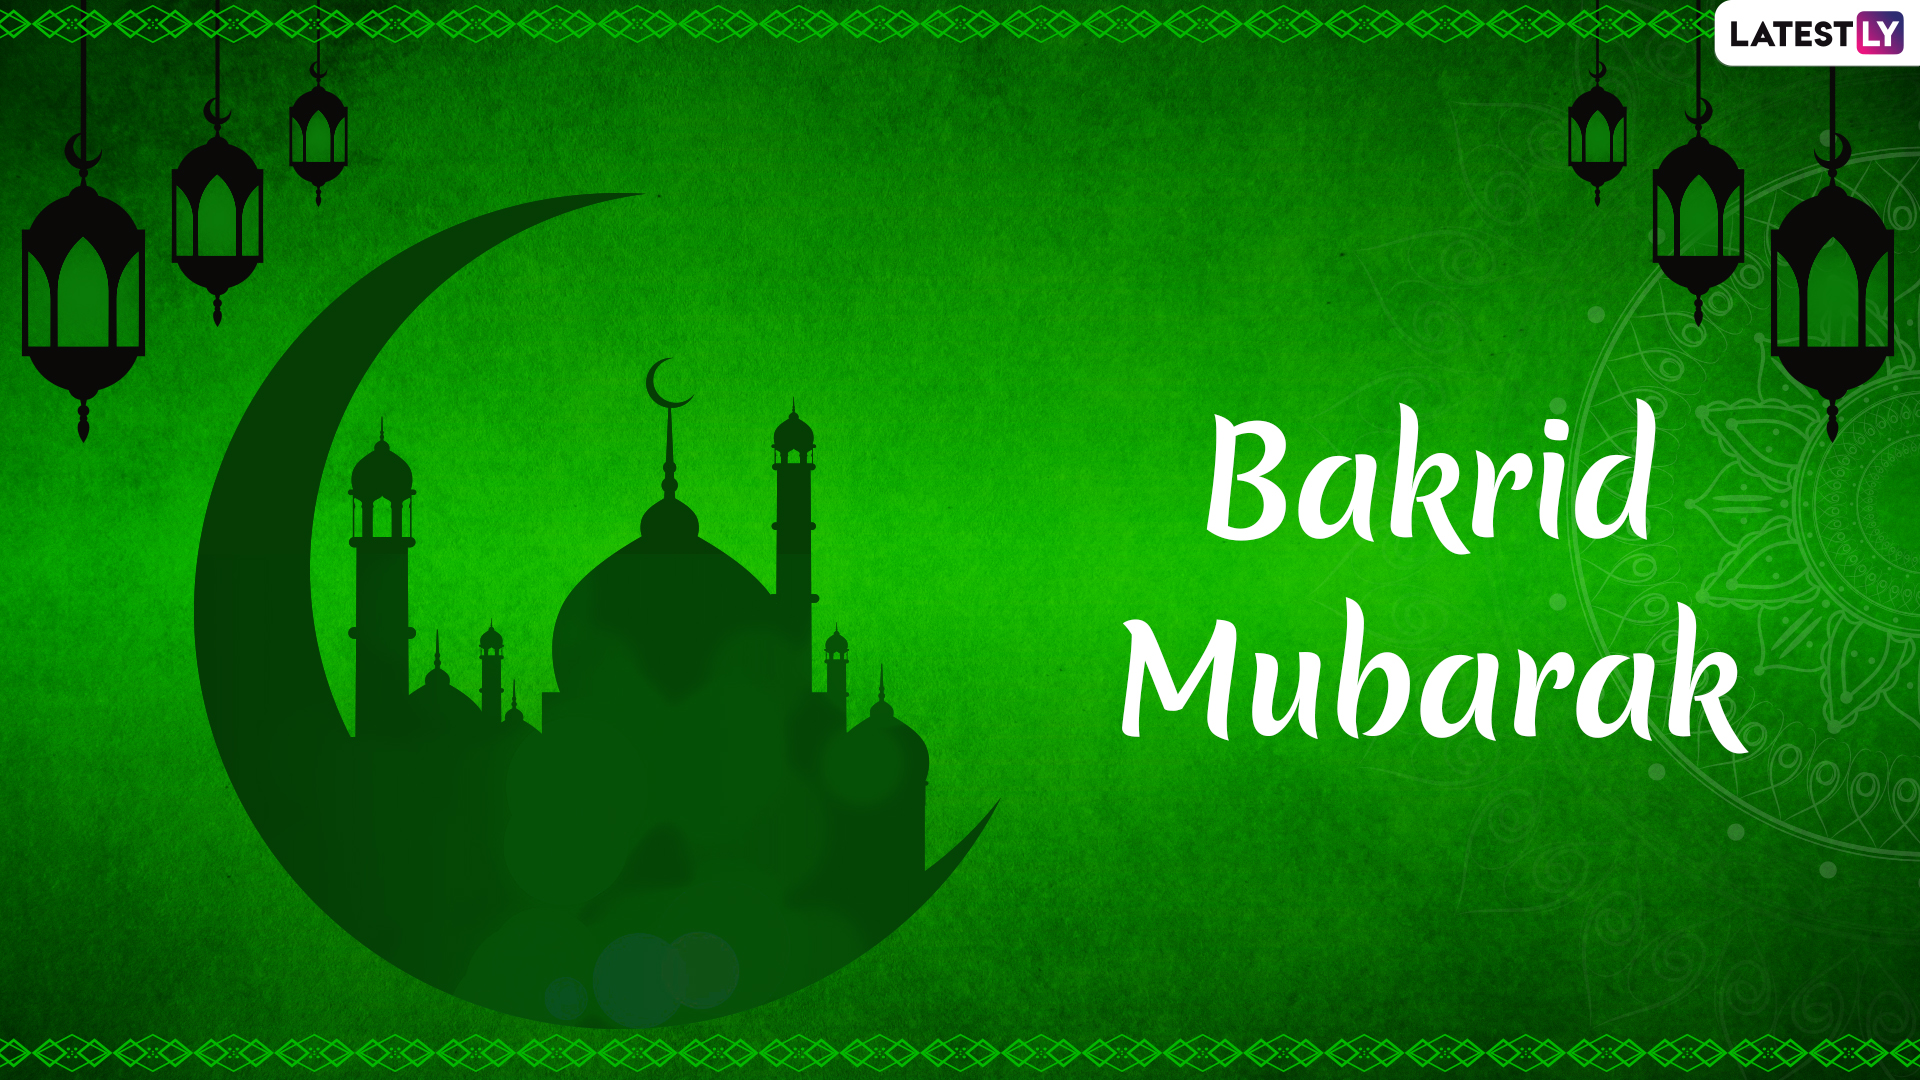 Bakra Eid Mubarak Images and Bakrid HD Wallpapers For Free 